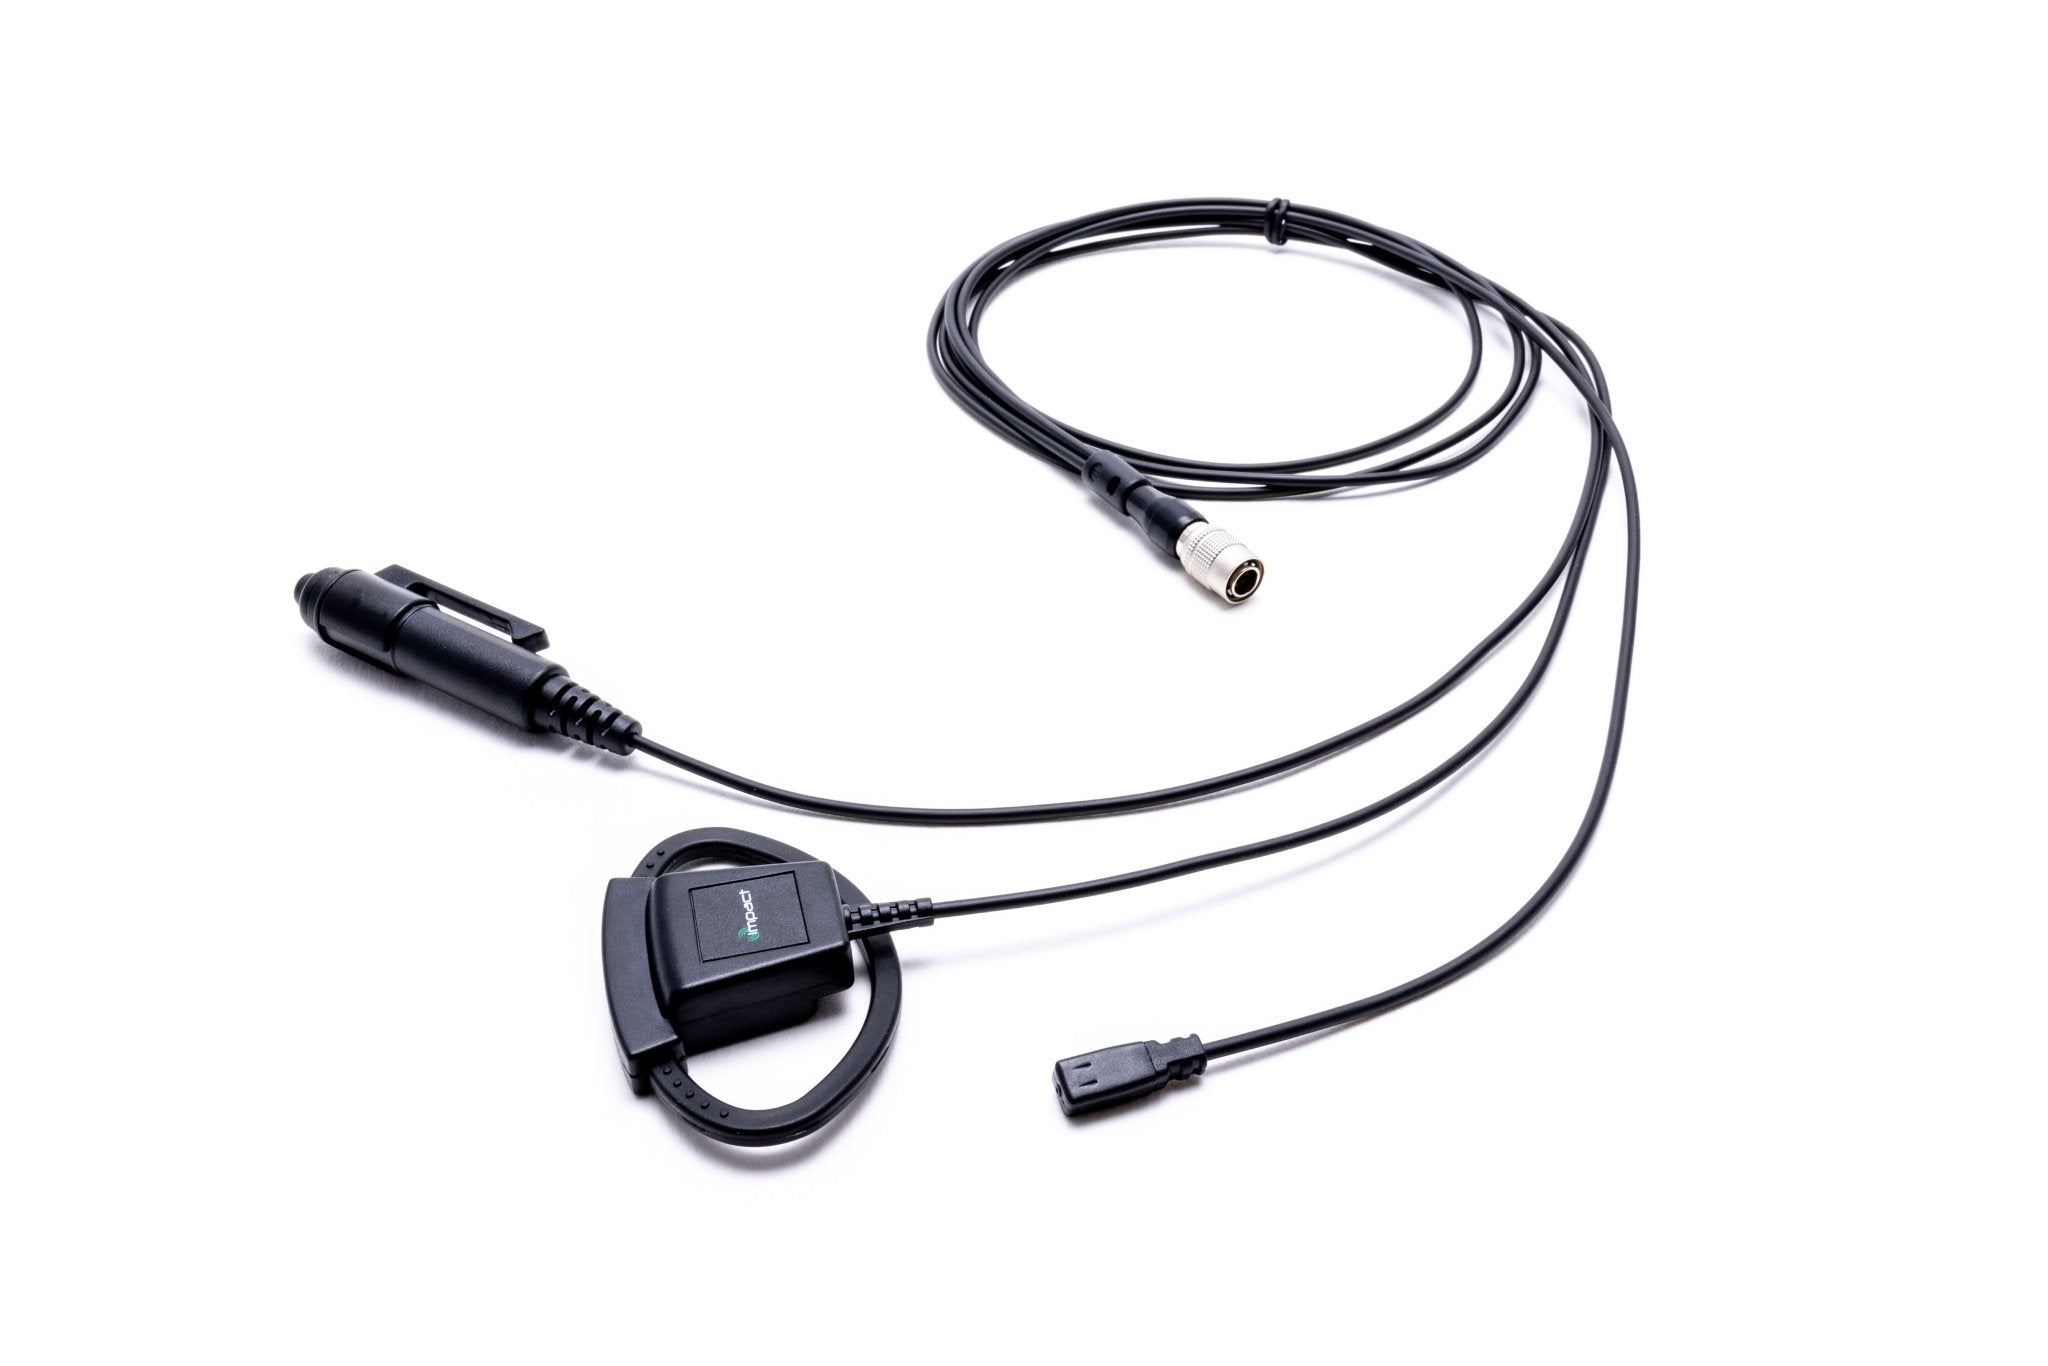 Impact Platinum Series 3-Wire Surveillance Kit with Silent Barrel Push-to-Talk (PTT) and Adjustable D-Shaped Ear Hanger